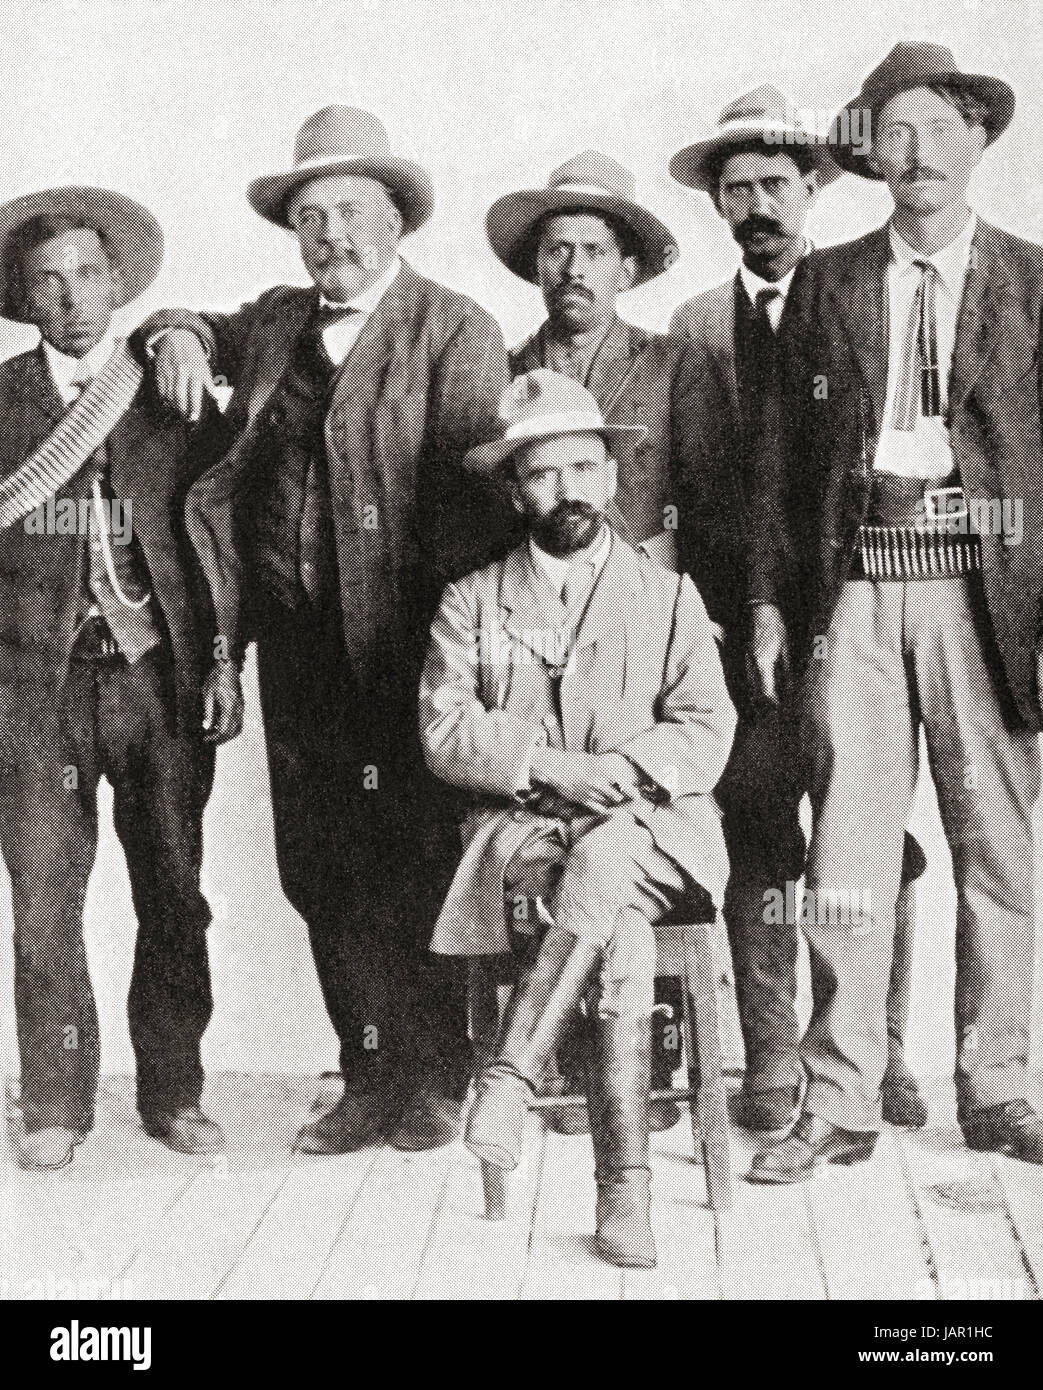 Francisco Ignacio Madero González (seated), 1873– 1913. Mexican statesman, writer, revolutionary and the 33rd president of Mexico.  From Hutchinson's History of the Nations, published 1915. Stock Photo